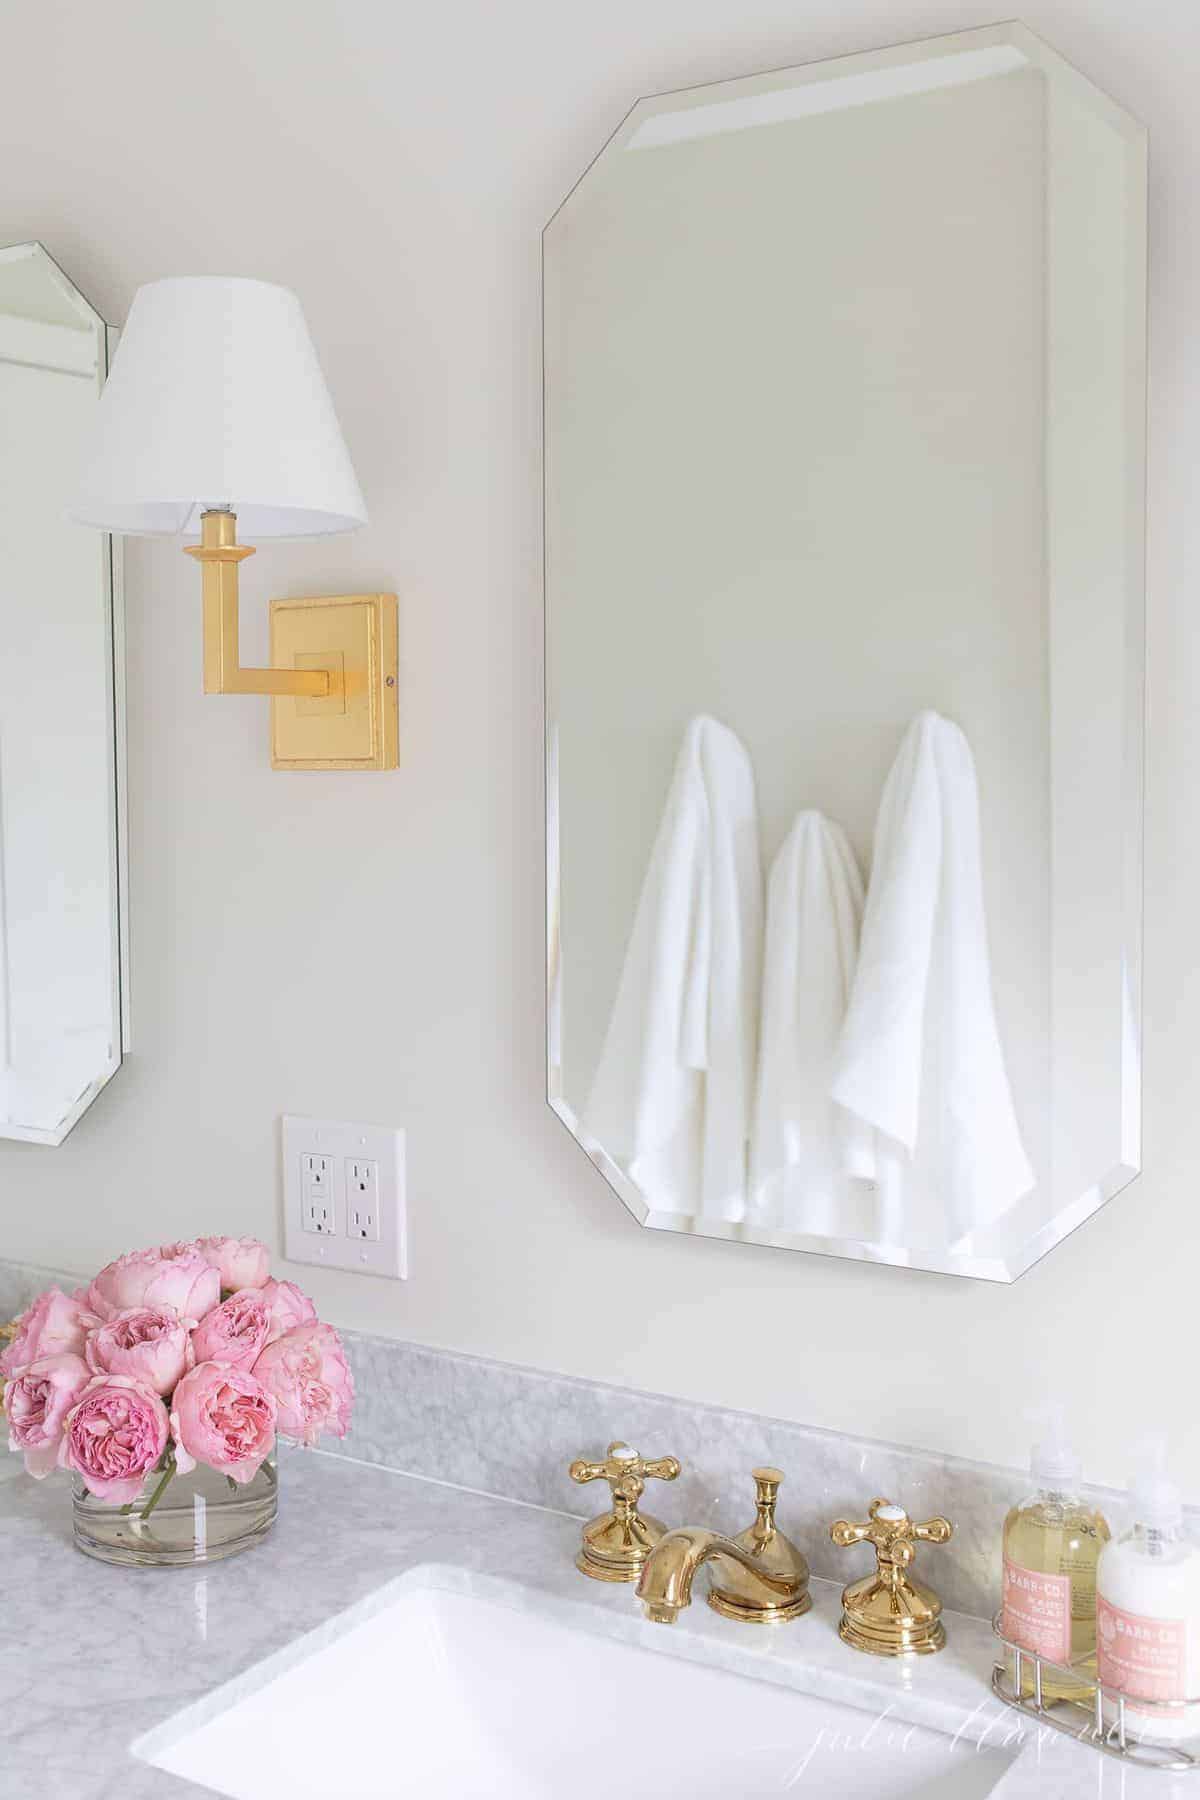 Mirrored medicine cabinets above a marble vanity. 